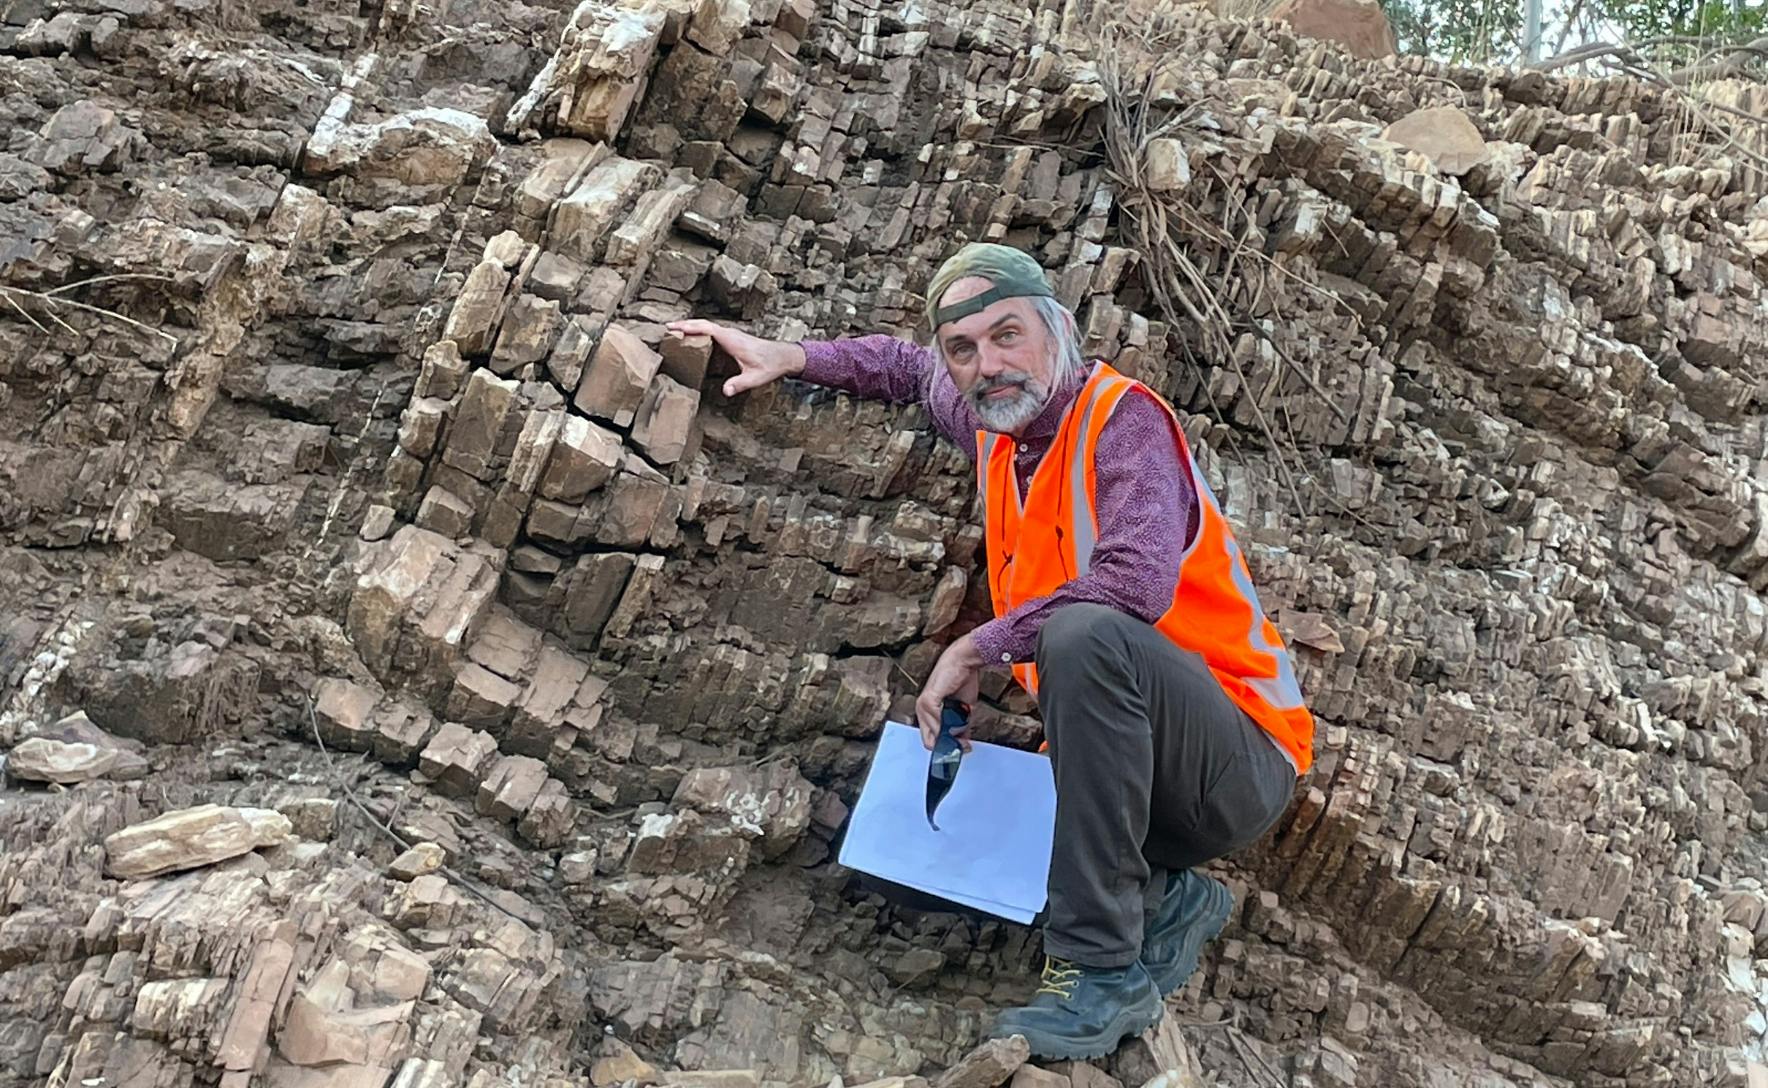 Professor Jochen Brocks inspecting the 1.6-billion-year-old rocks in Australia's Northern Territory. He is crouching next to the rock face and is wearing a fluorescent orange vest and a green backwards cap.